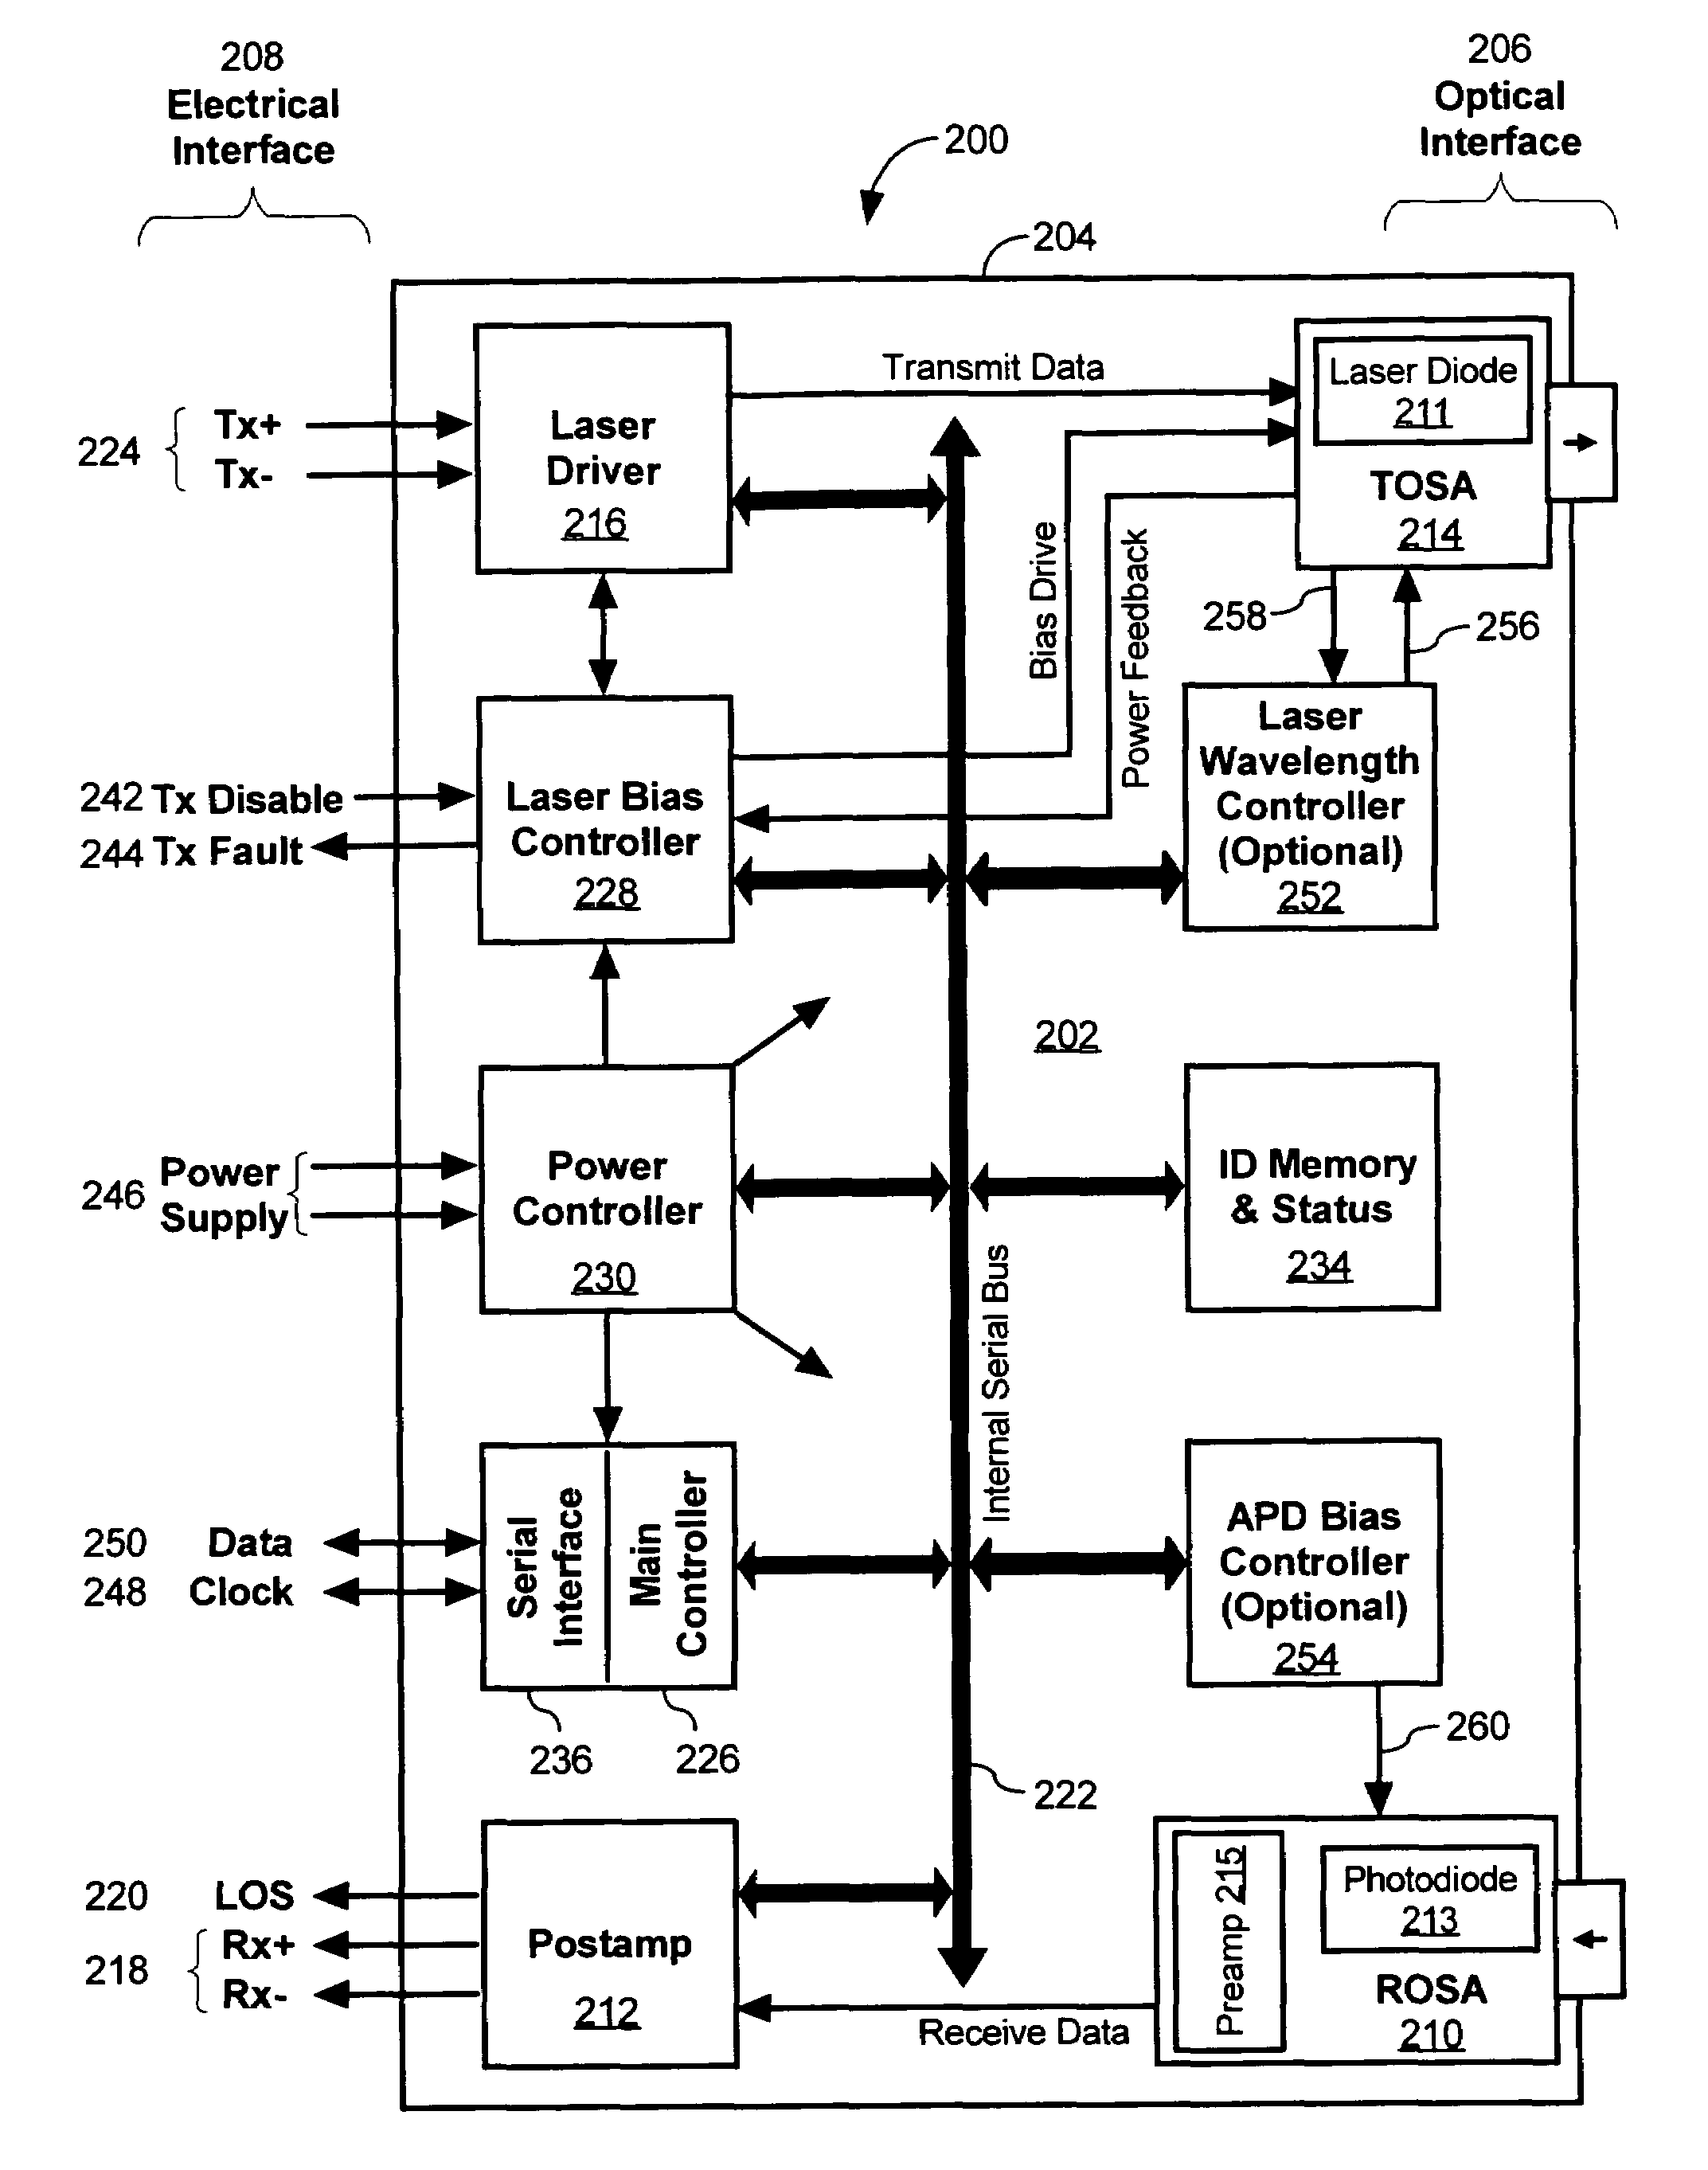 Optical transceiver module with power integrated circuit